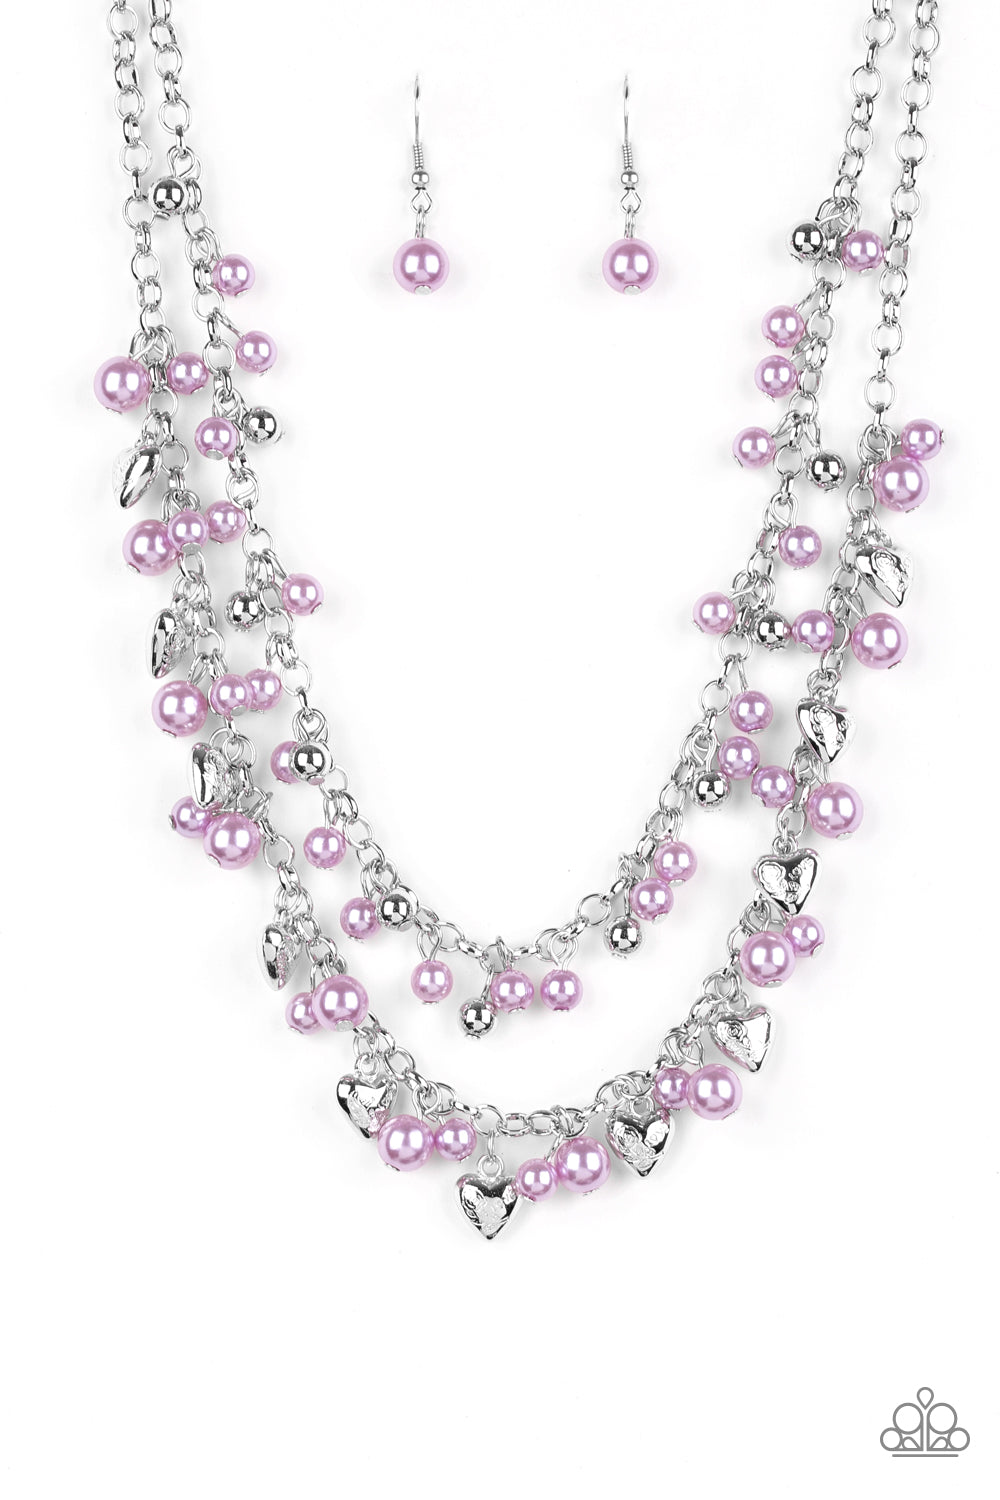 KINDHEARTED HEART - PURPLE LAVENDER PEARLS SILVER HEARTS CHARM NECKLACE